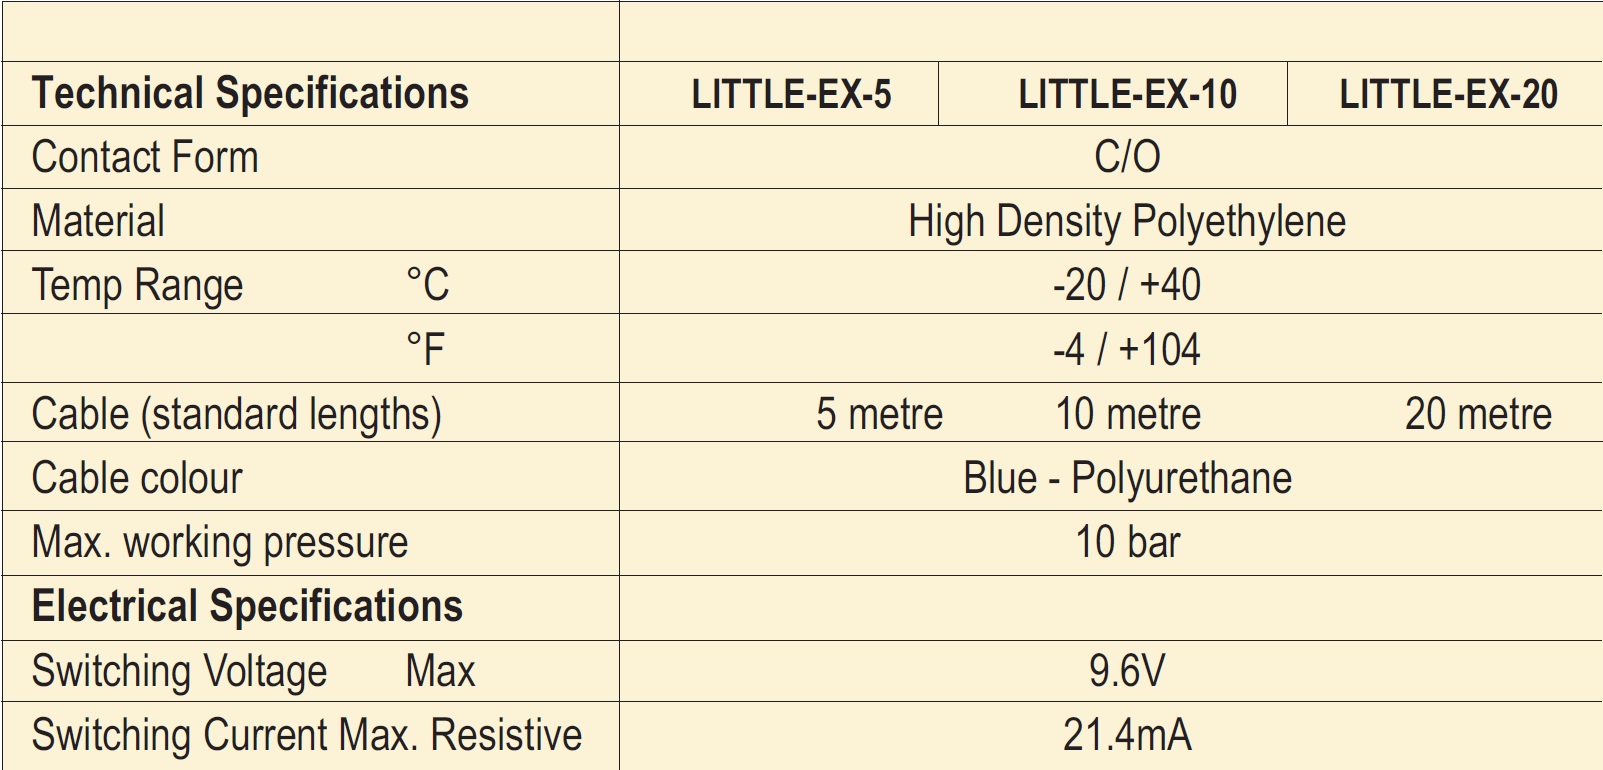 Cynergy3 LITTLE-EX series specifications